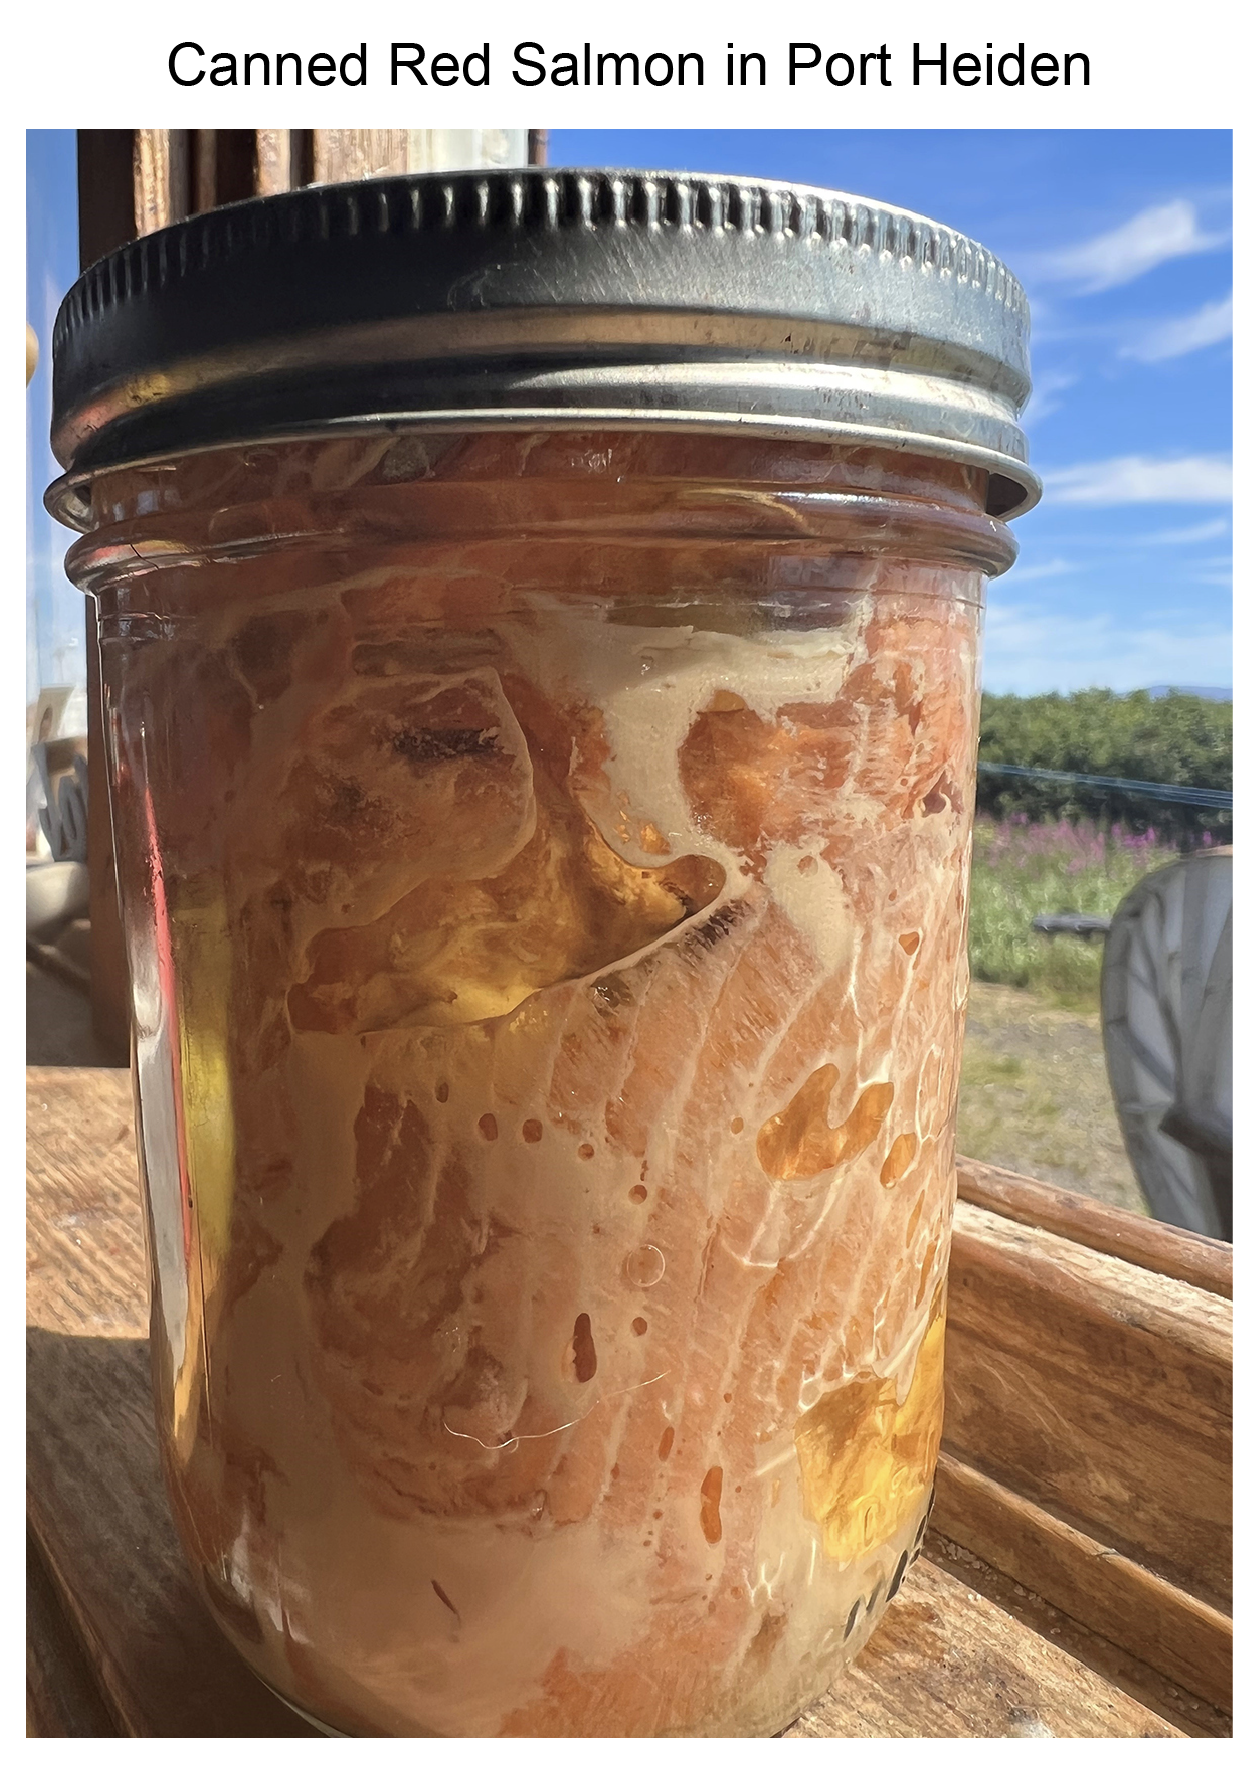 Canned Red Salmon in Port Heiden